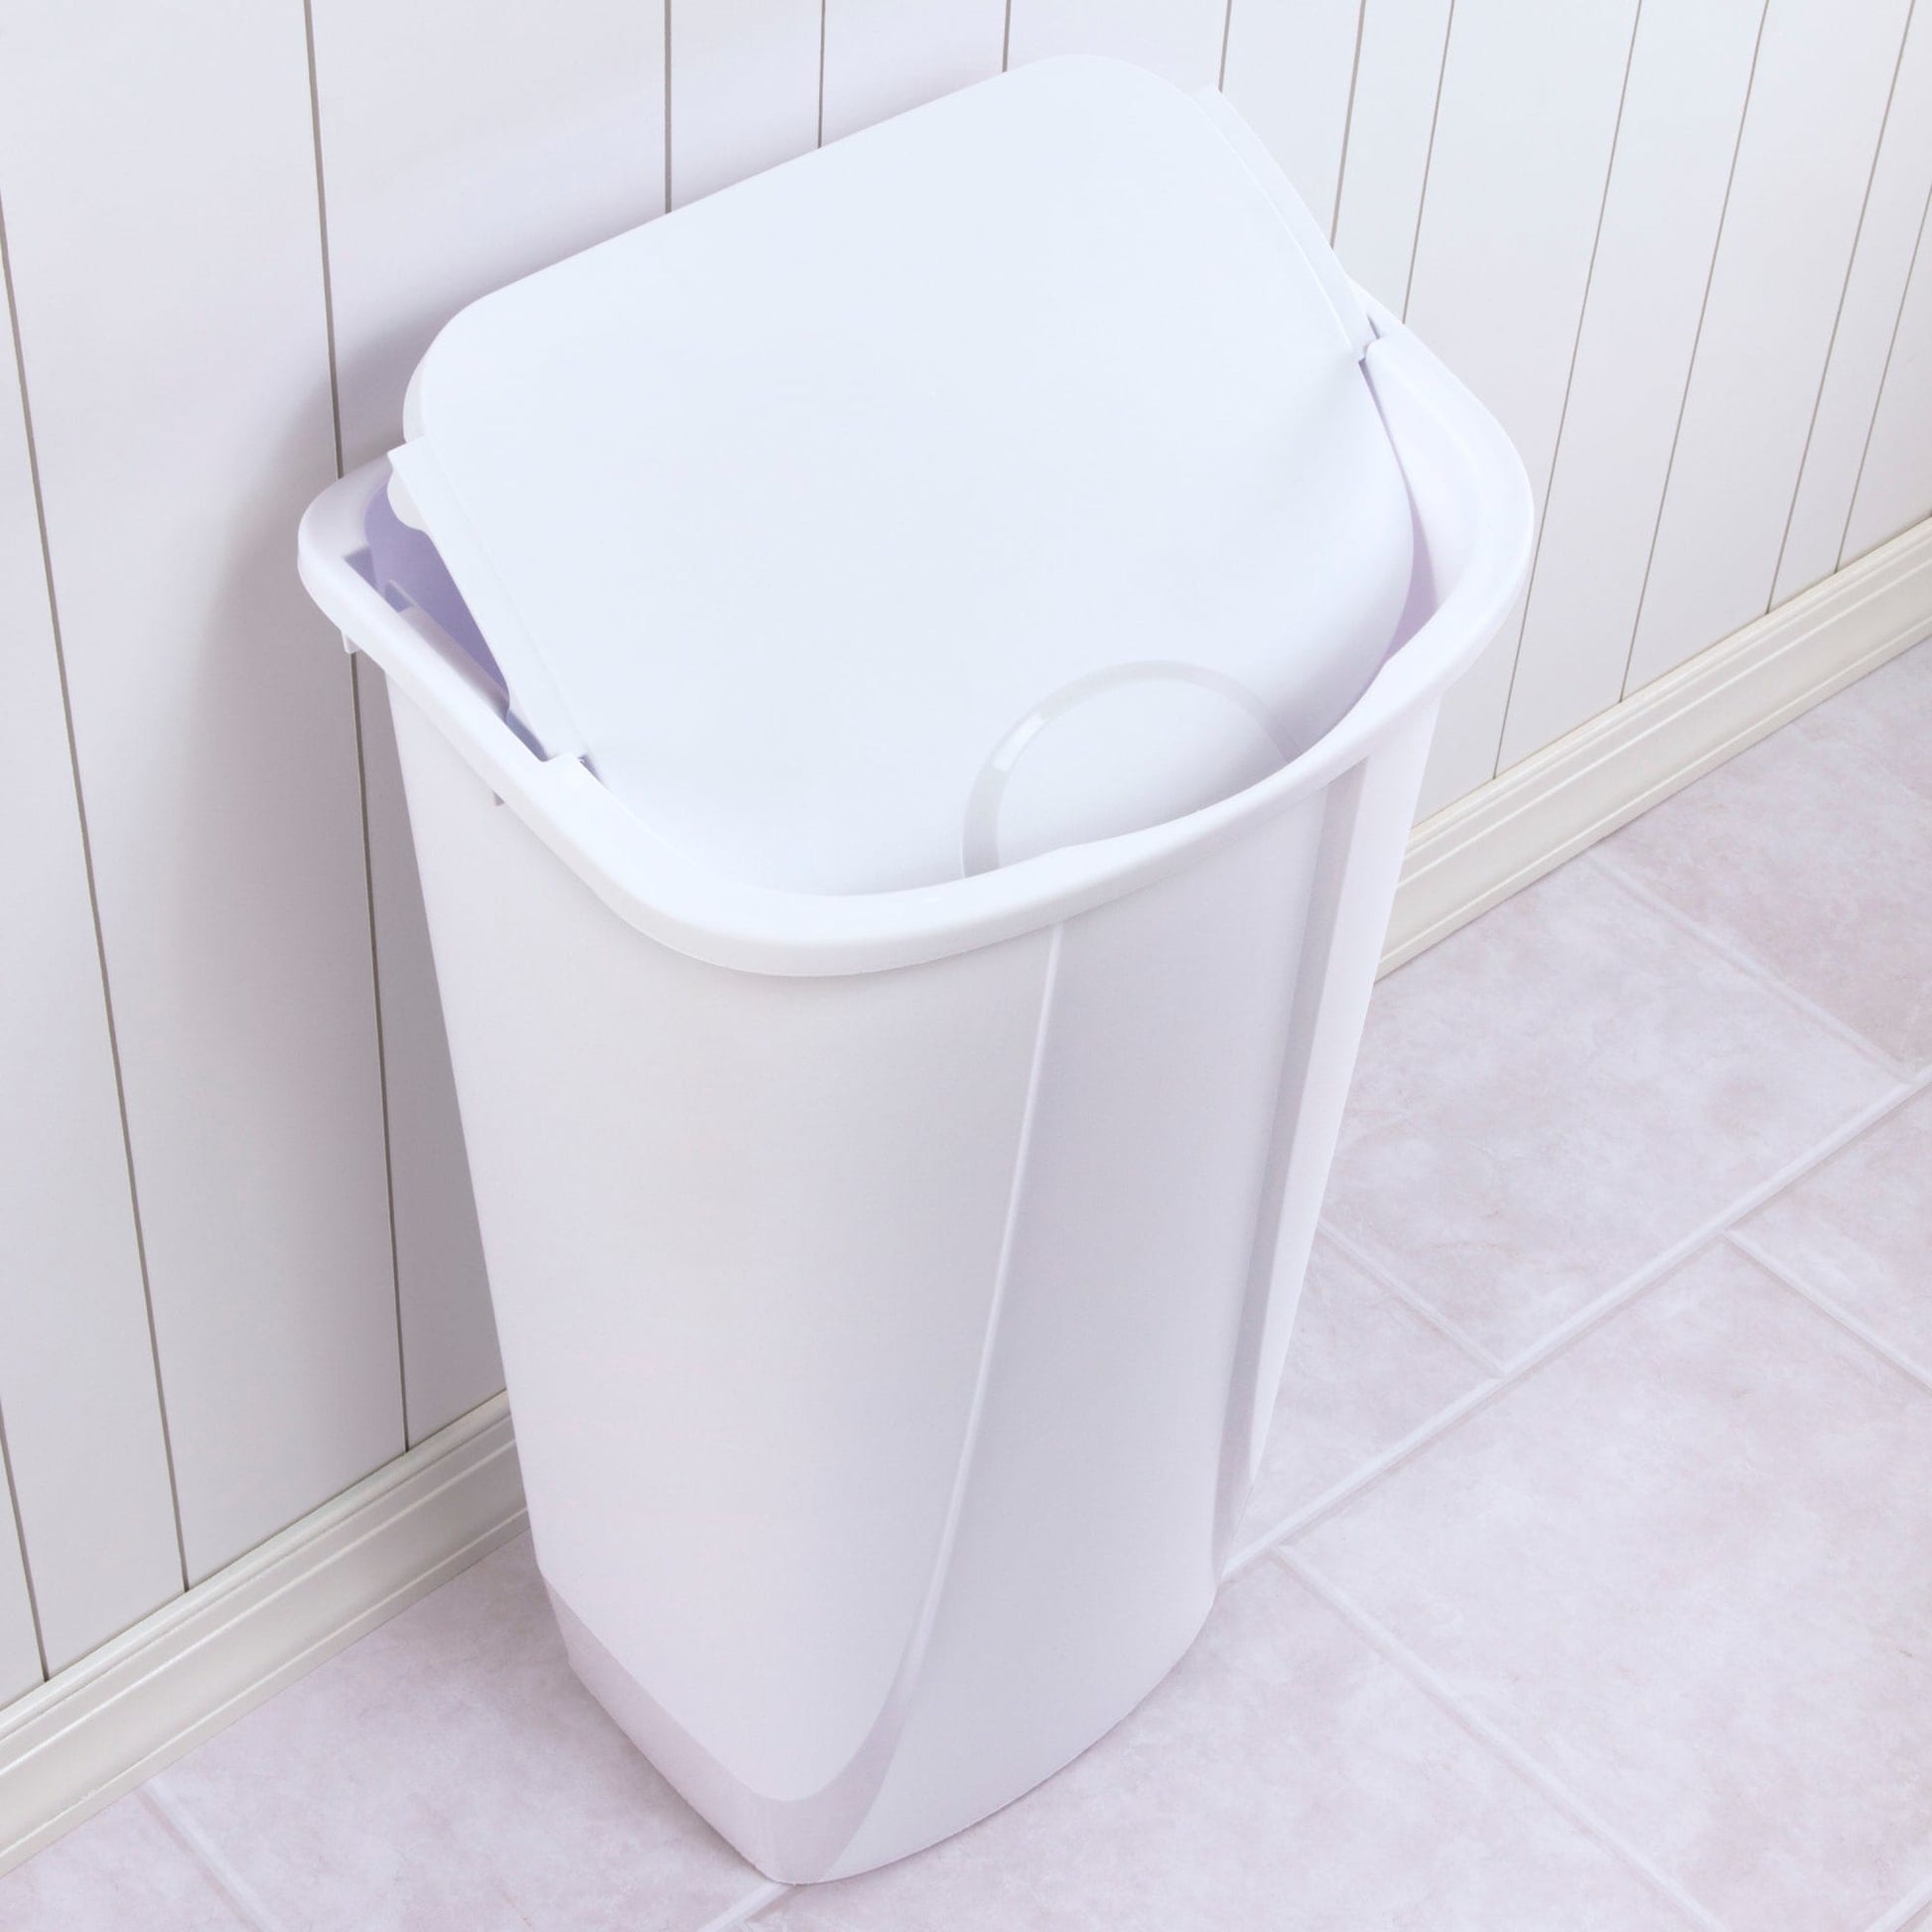 Sterilite Slim Trash Can with Lid, Step On 11 Gal White Kitchen